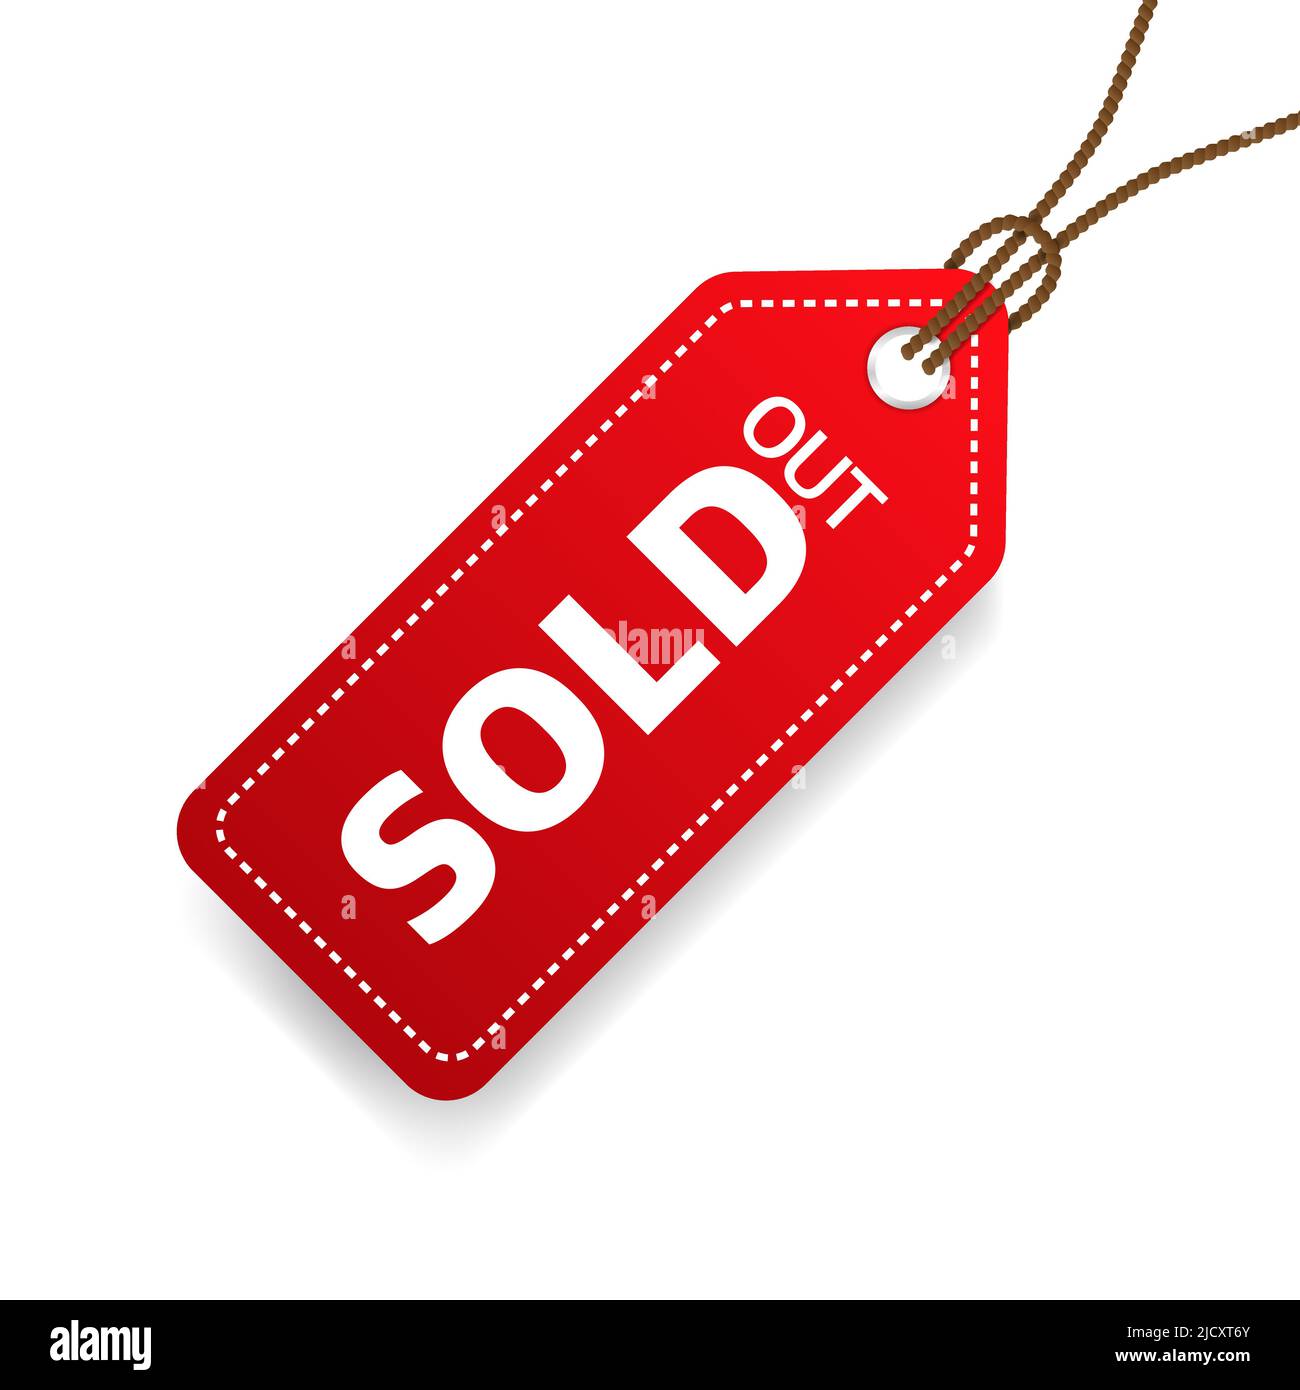 Sold out price tag sign. vector illustration Stock Vector